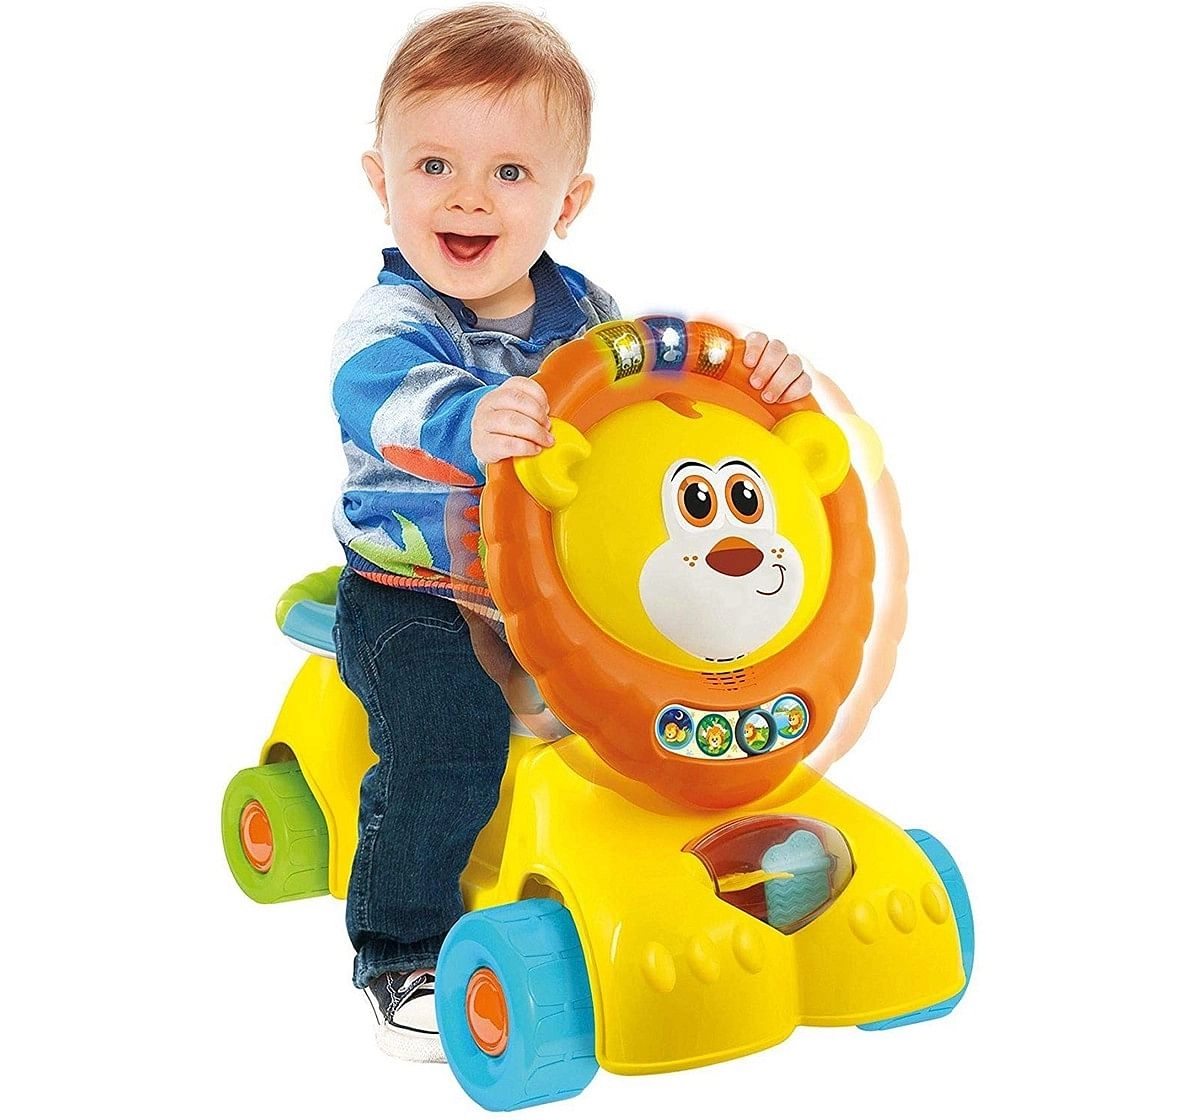 Winfun 3 in 1 Grow With Me Lion Scooter Baby Gear for Kids age 12M+ (Yellow)